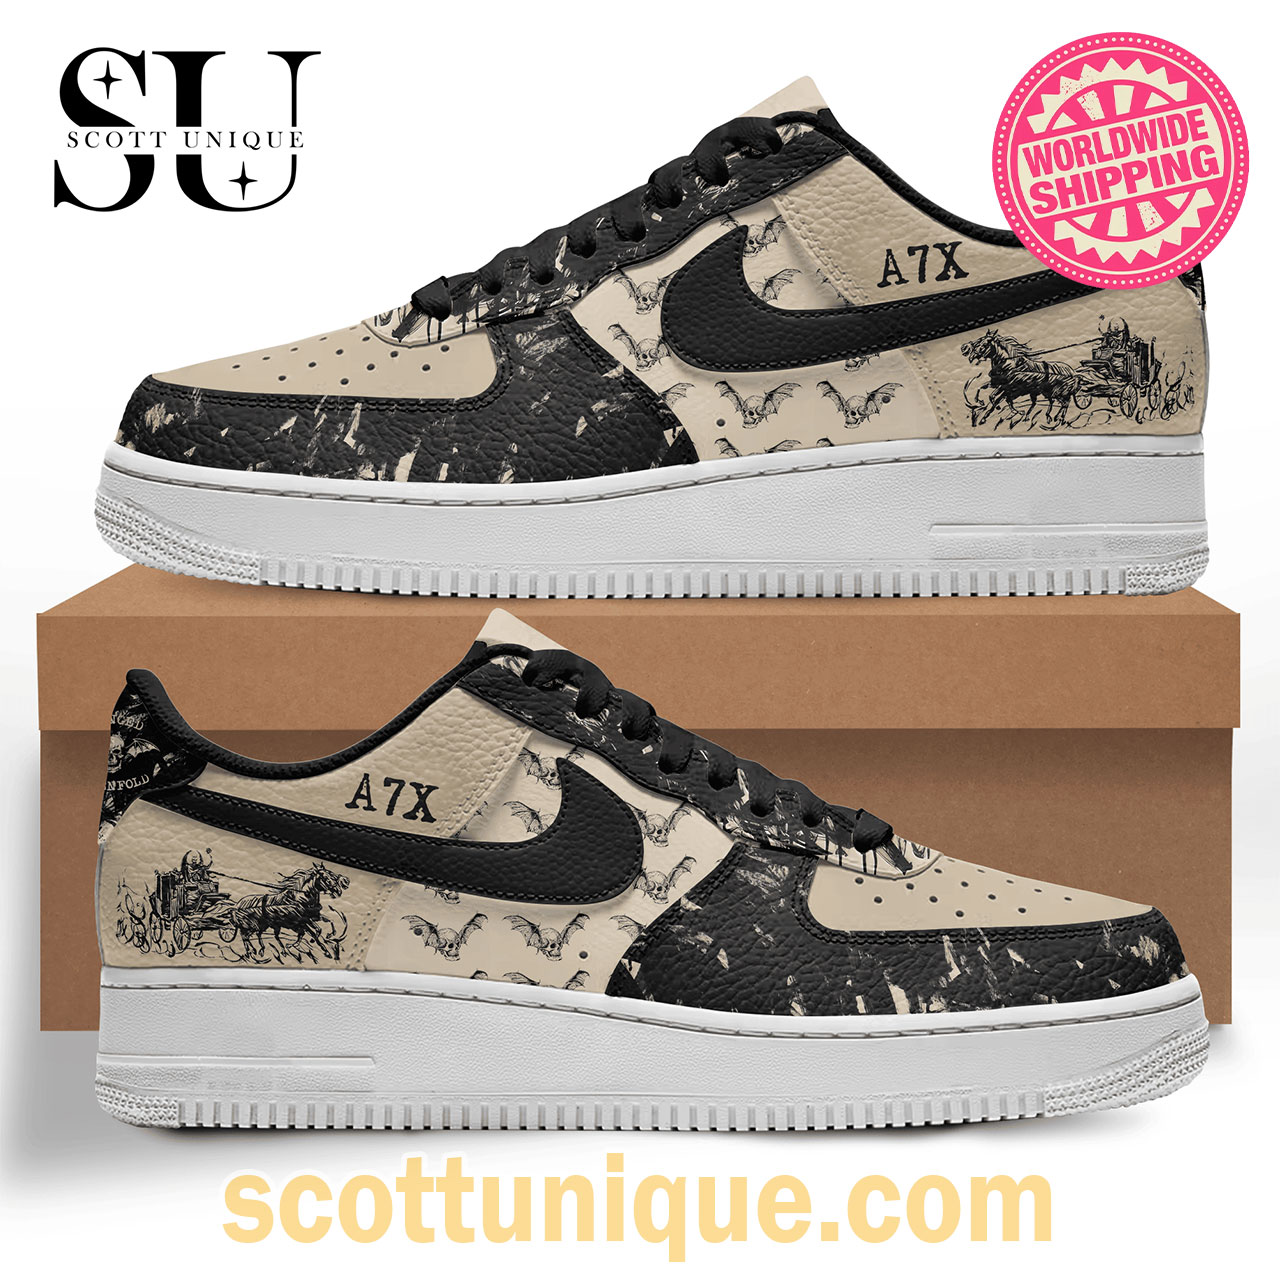 A7X Avenged Sevenfold Album Nike Air Force 1 Shoes